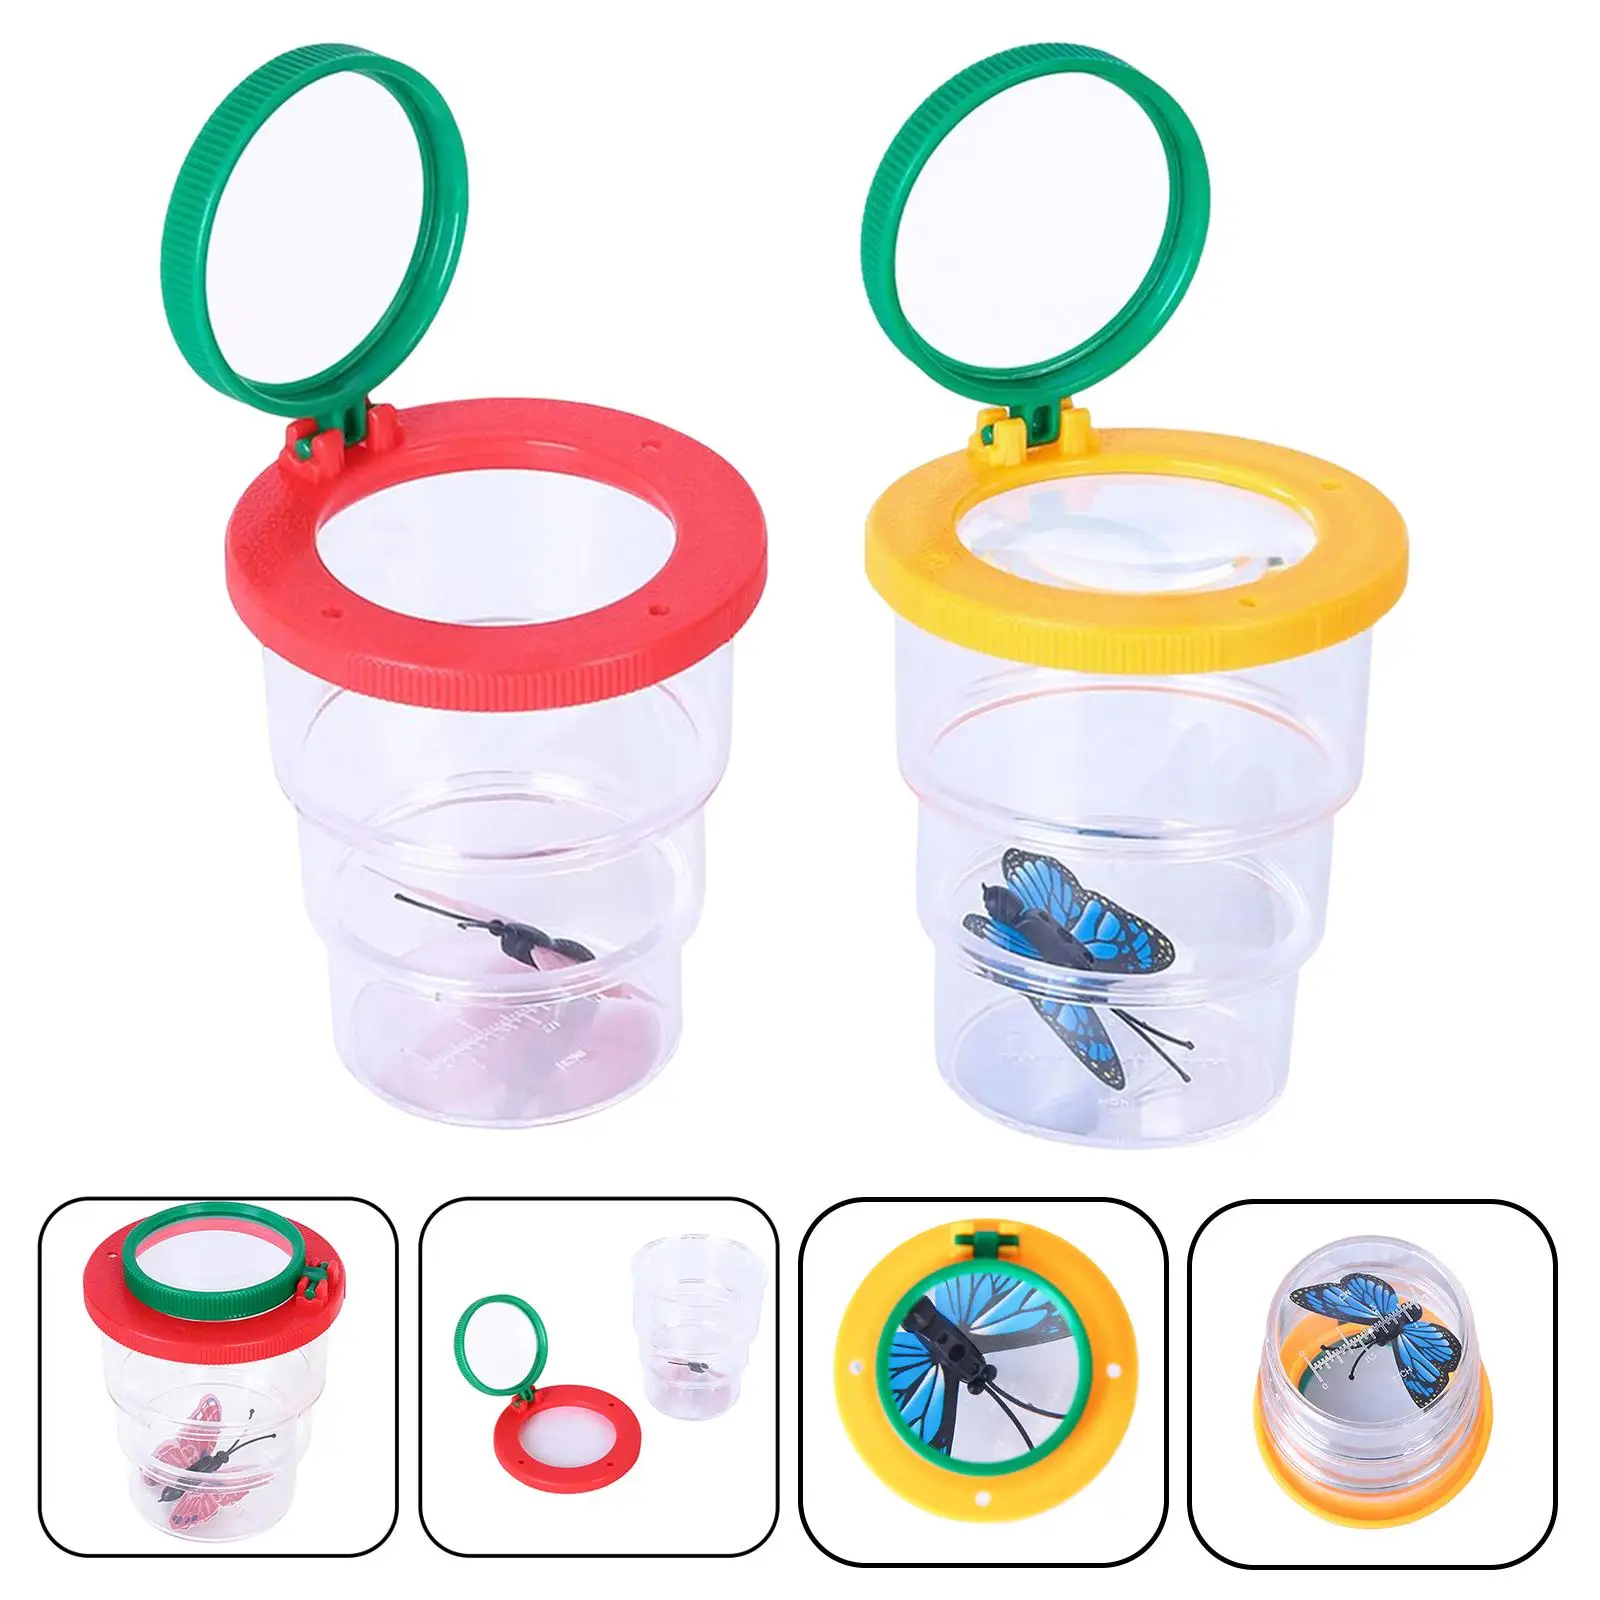 Portable Insect Magnifier Adventure Sports Game Kids Educational Toy Development Toy Insect Viewer for Kids Holiday Gifts